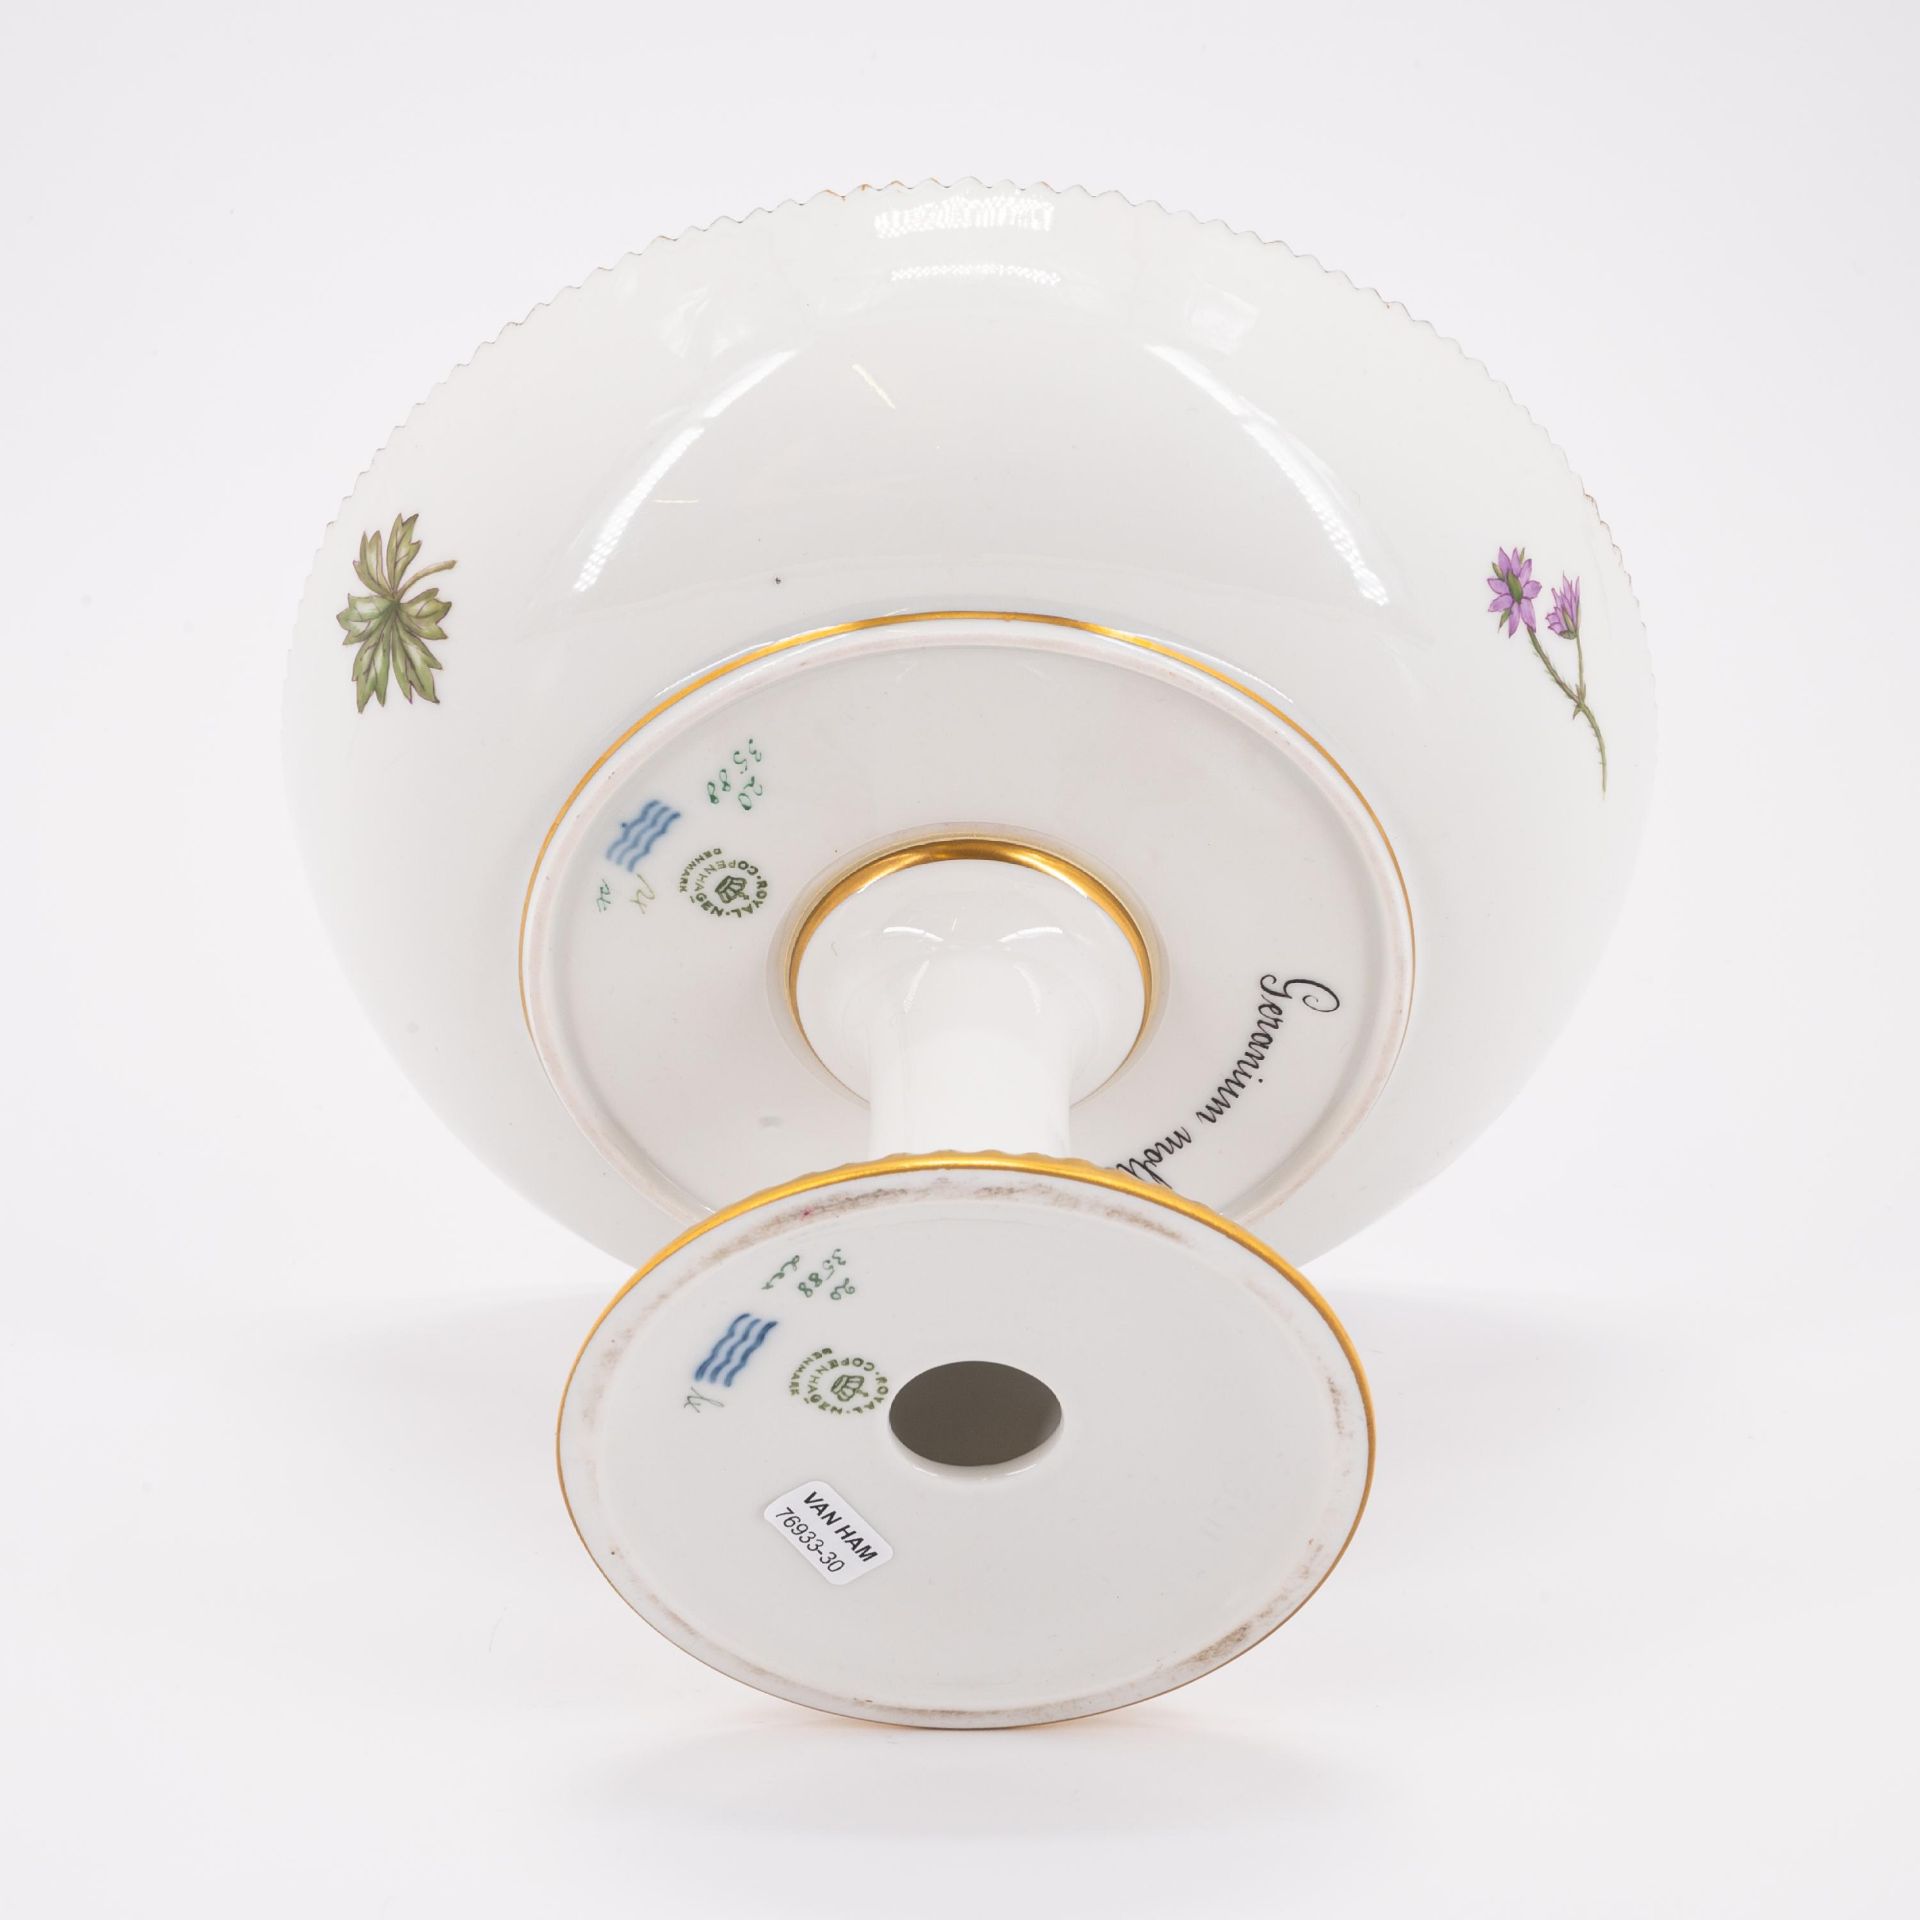 Royal Copenhagen: 95 PIECES FROM A 'FLORA DANICA' DINING SERVICE - Image 12 of 26